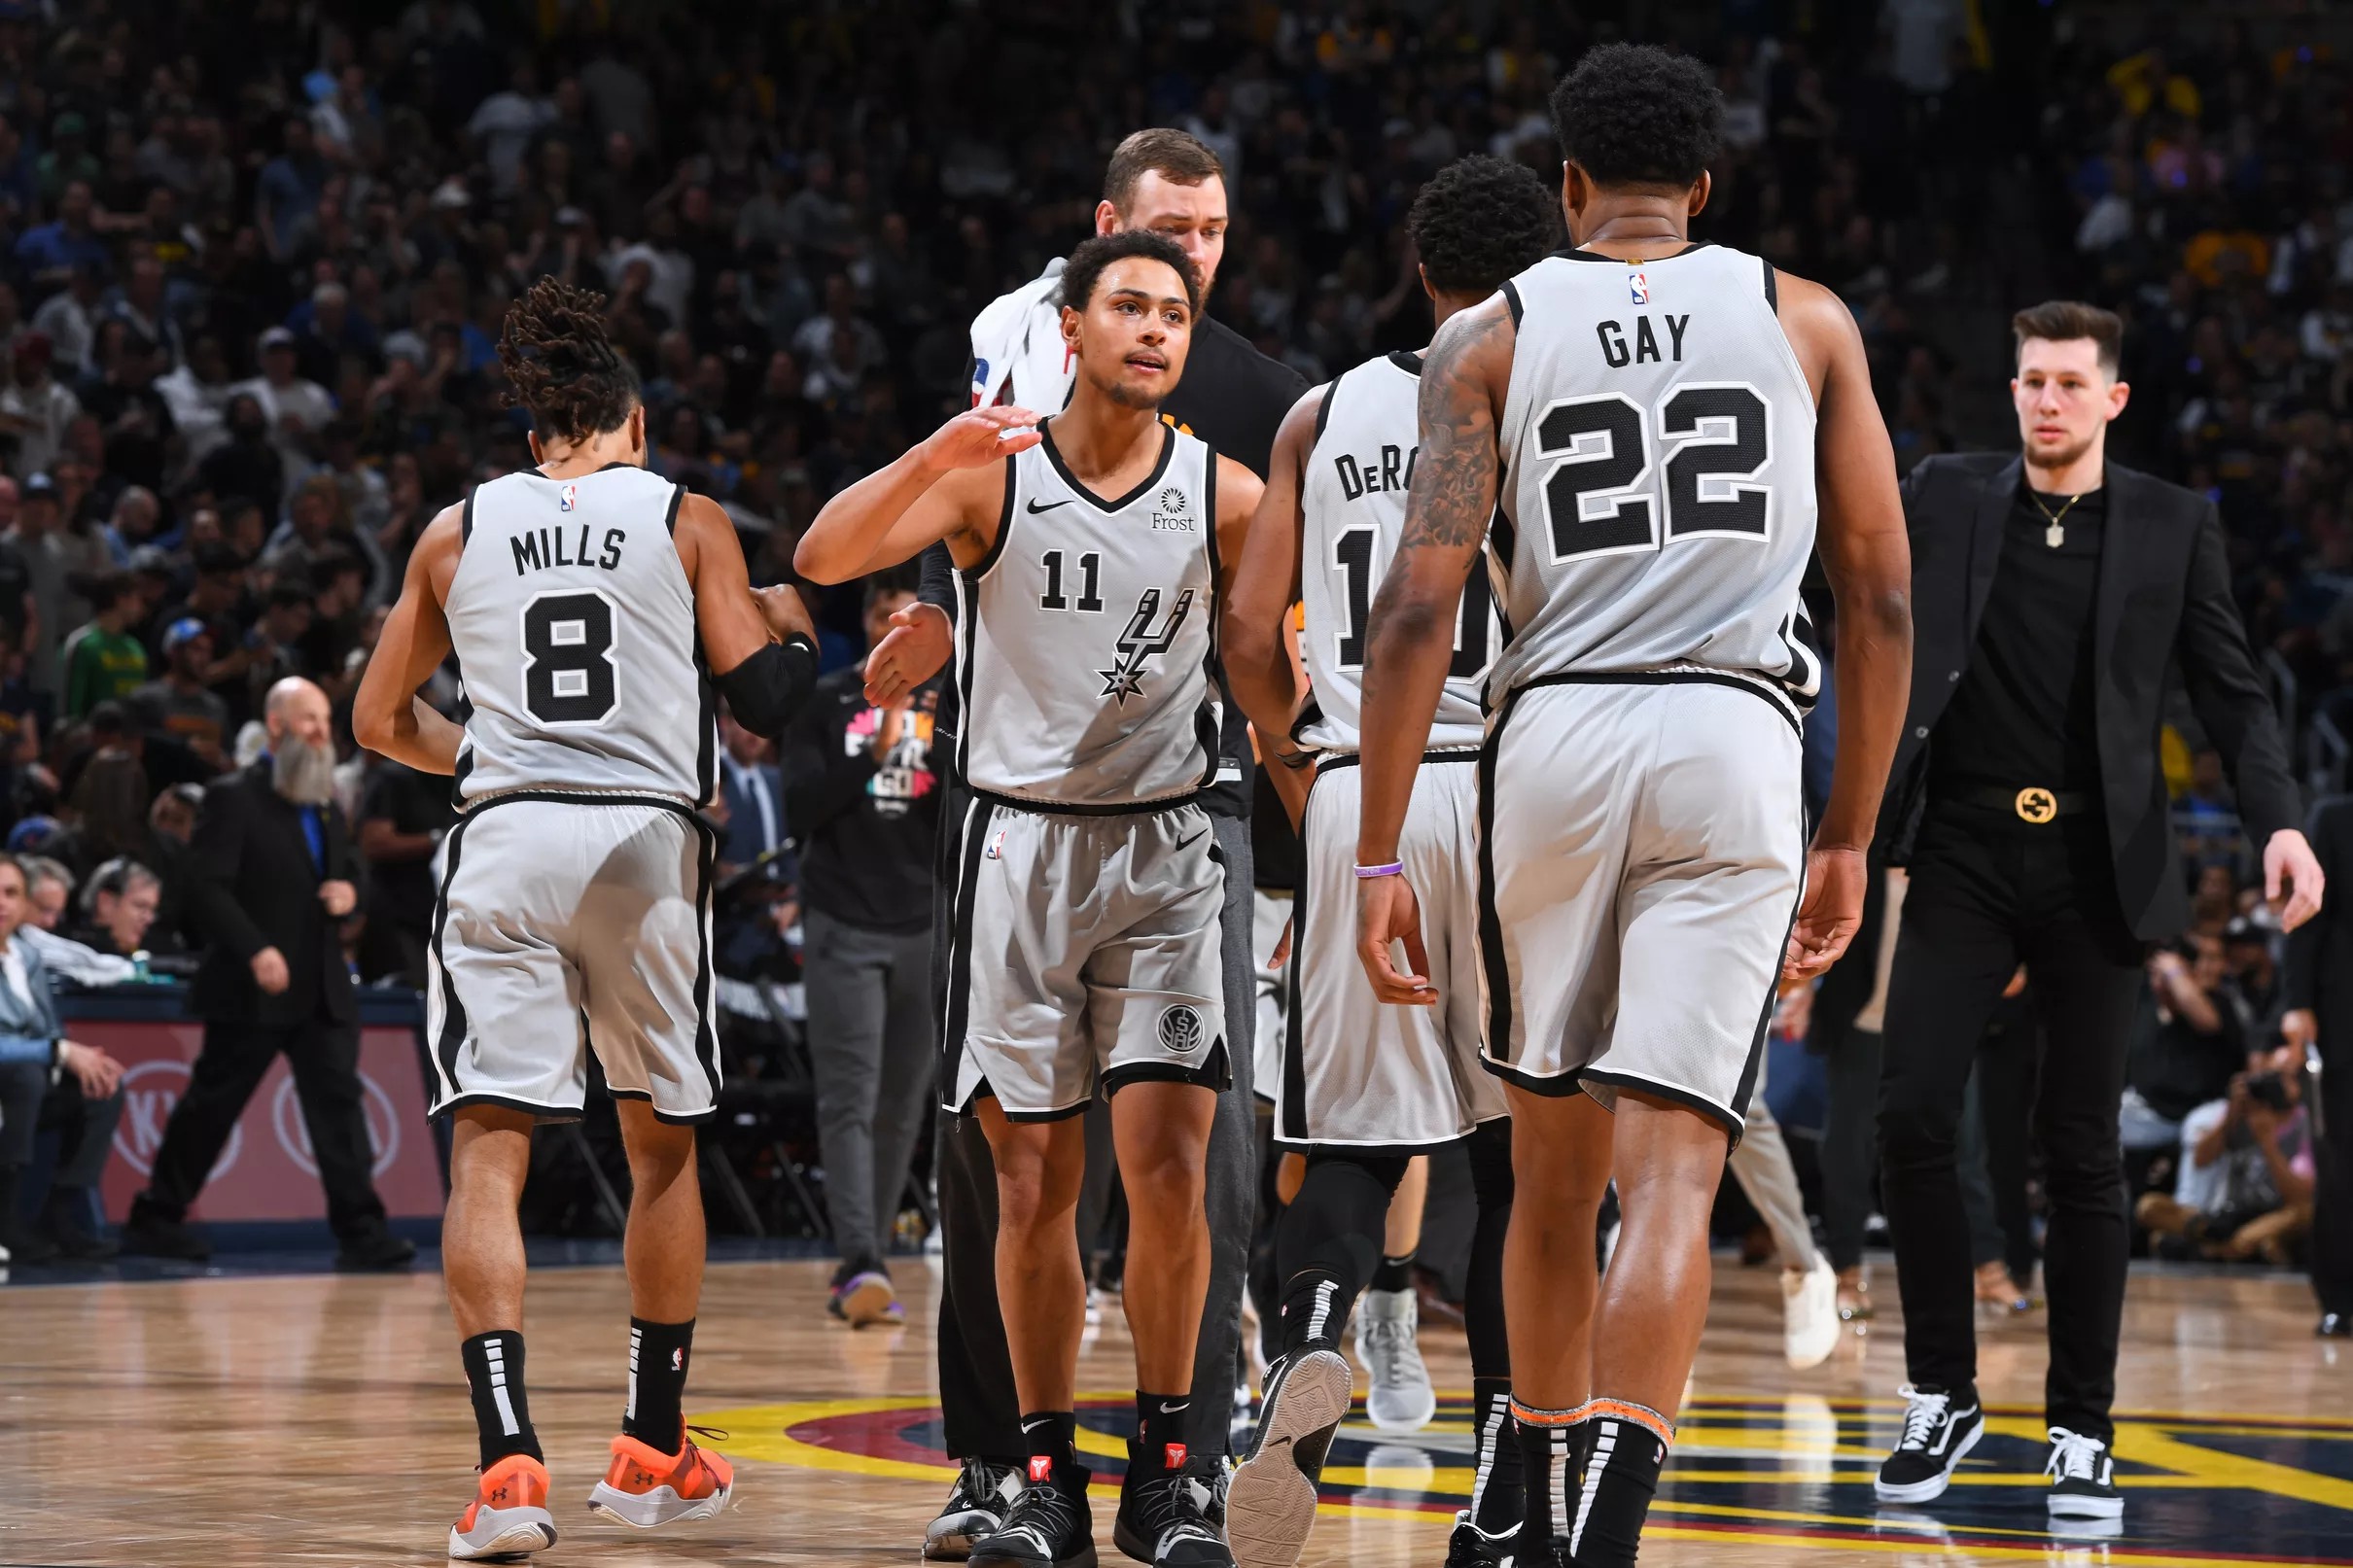 The Spurs’ schedule for the 201920 season has been released